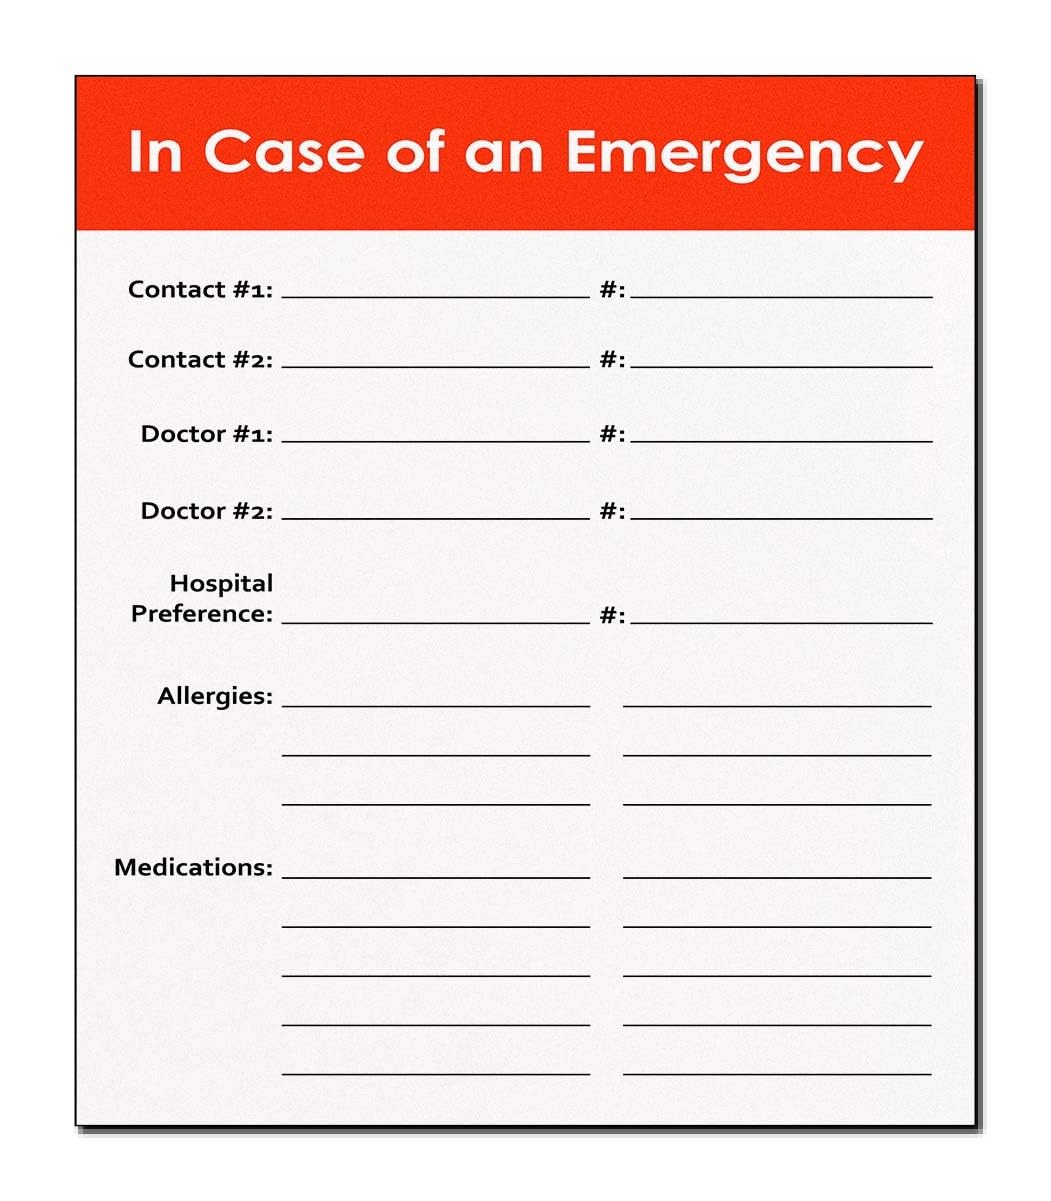 Emergency Contact Magnetic Sign For Children And Elderly By DCM Solutions (Burnt Orange, 10.5" H x 9" W)